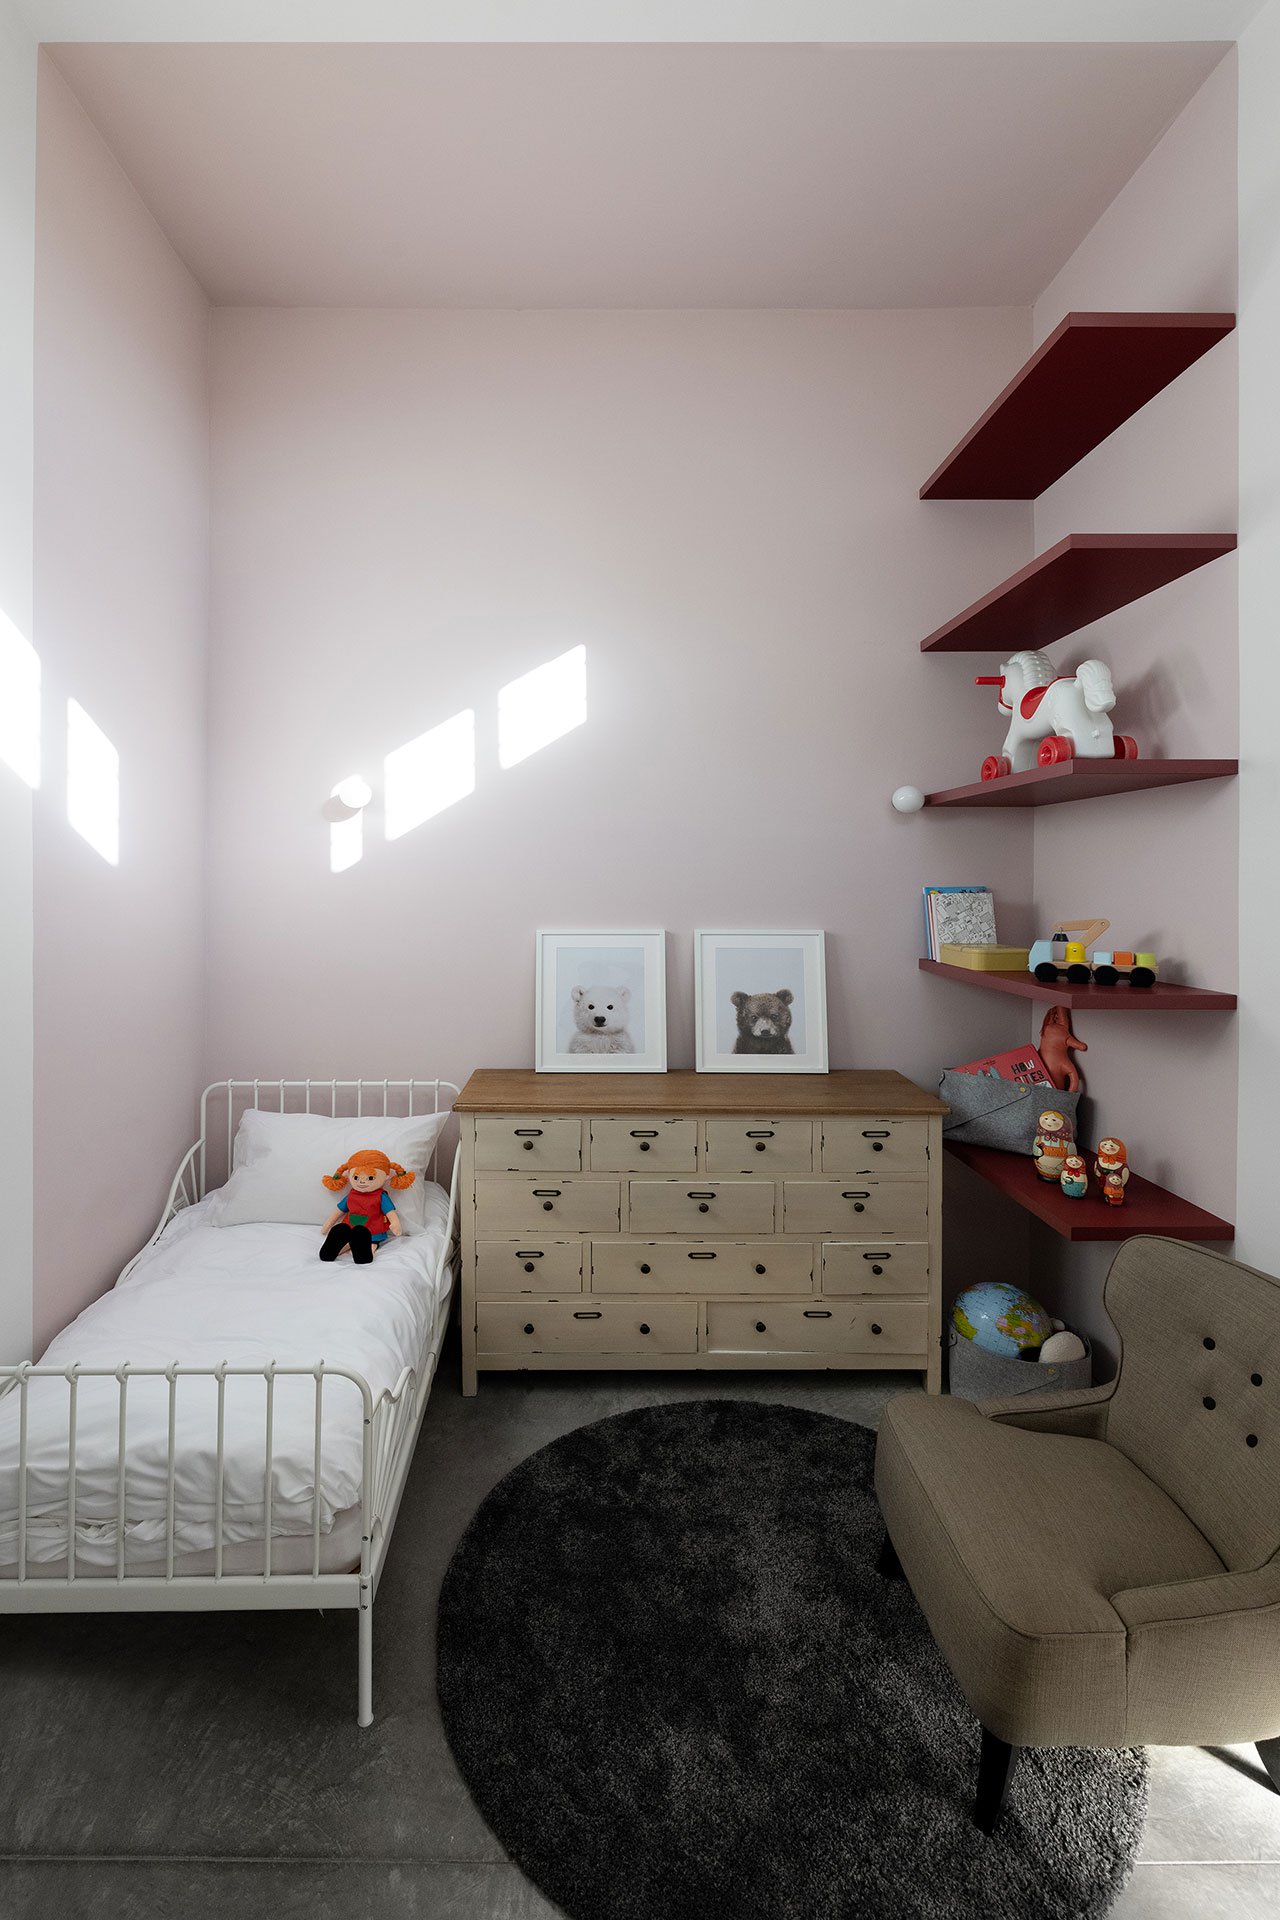 The kid's room is done with light pink, neutrals and open shelving